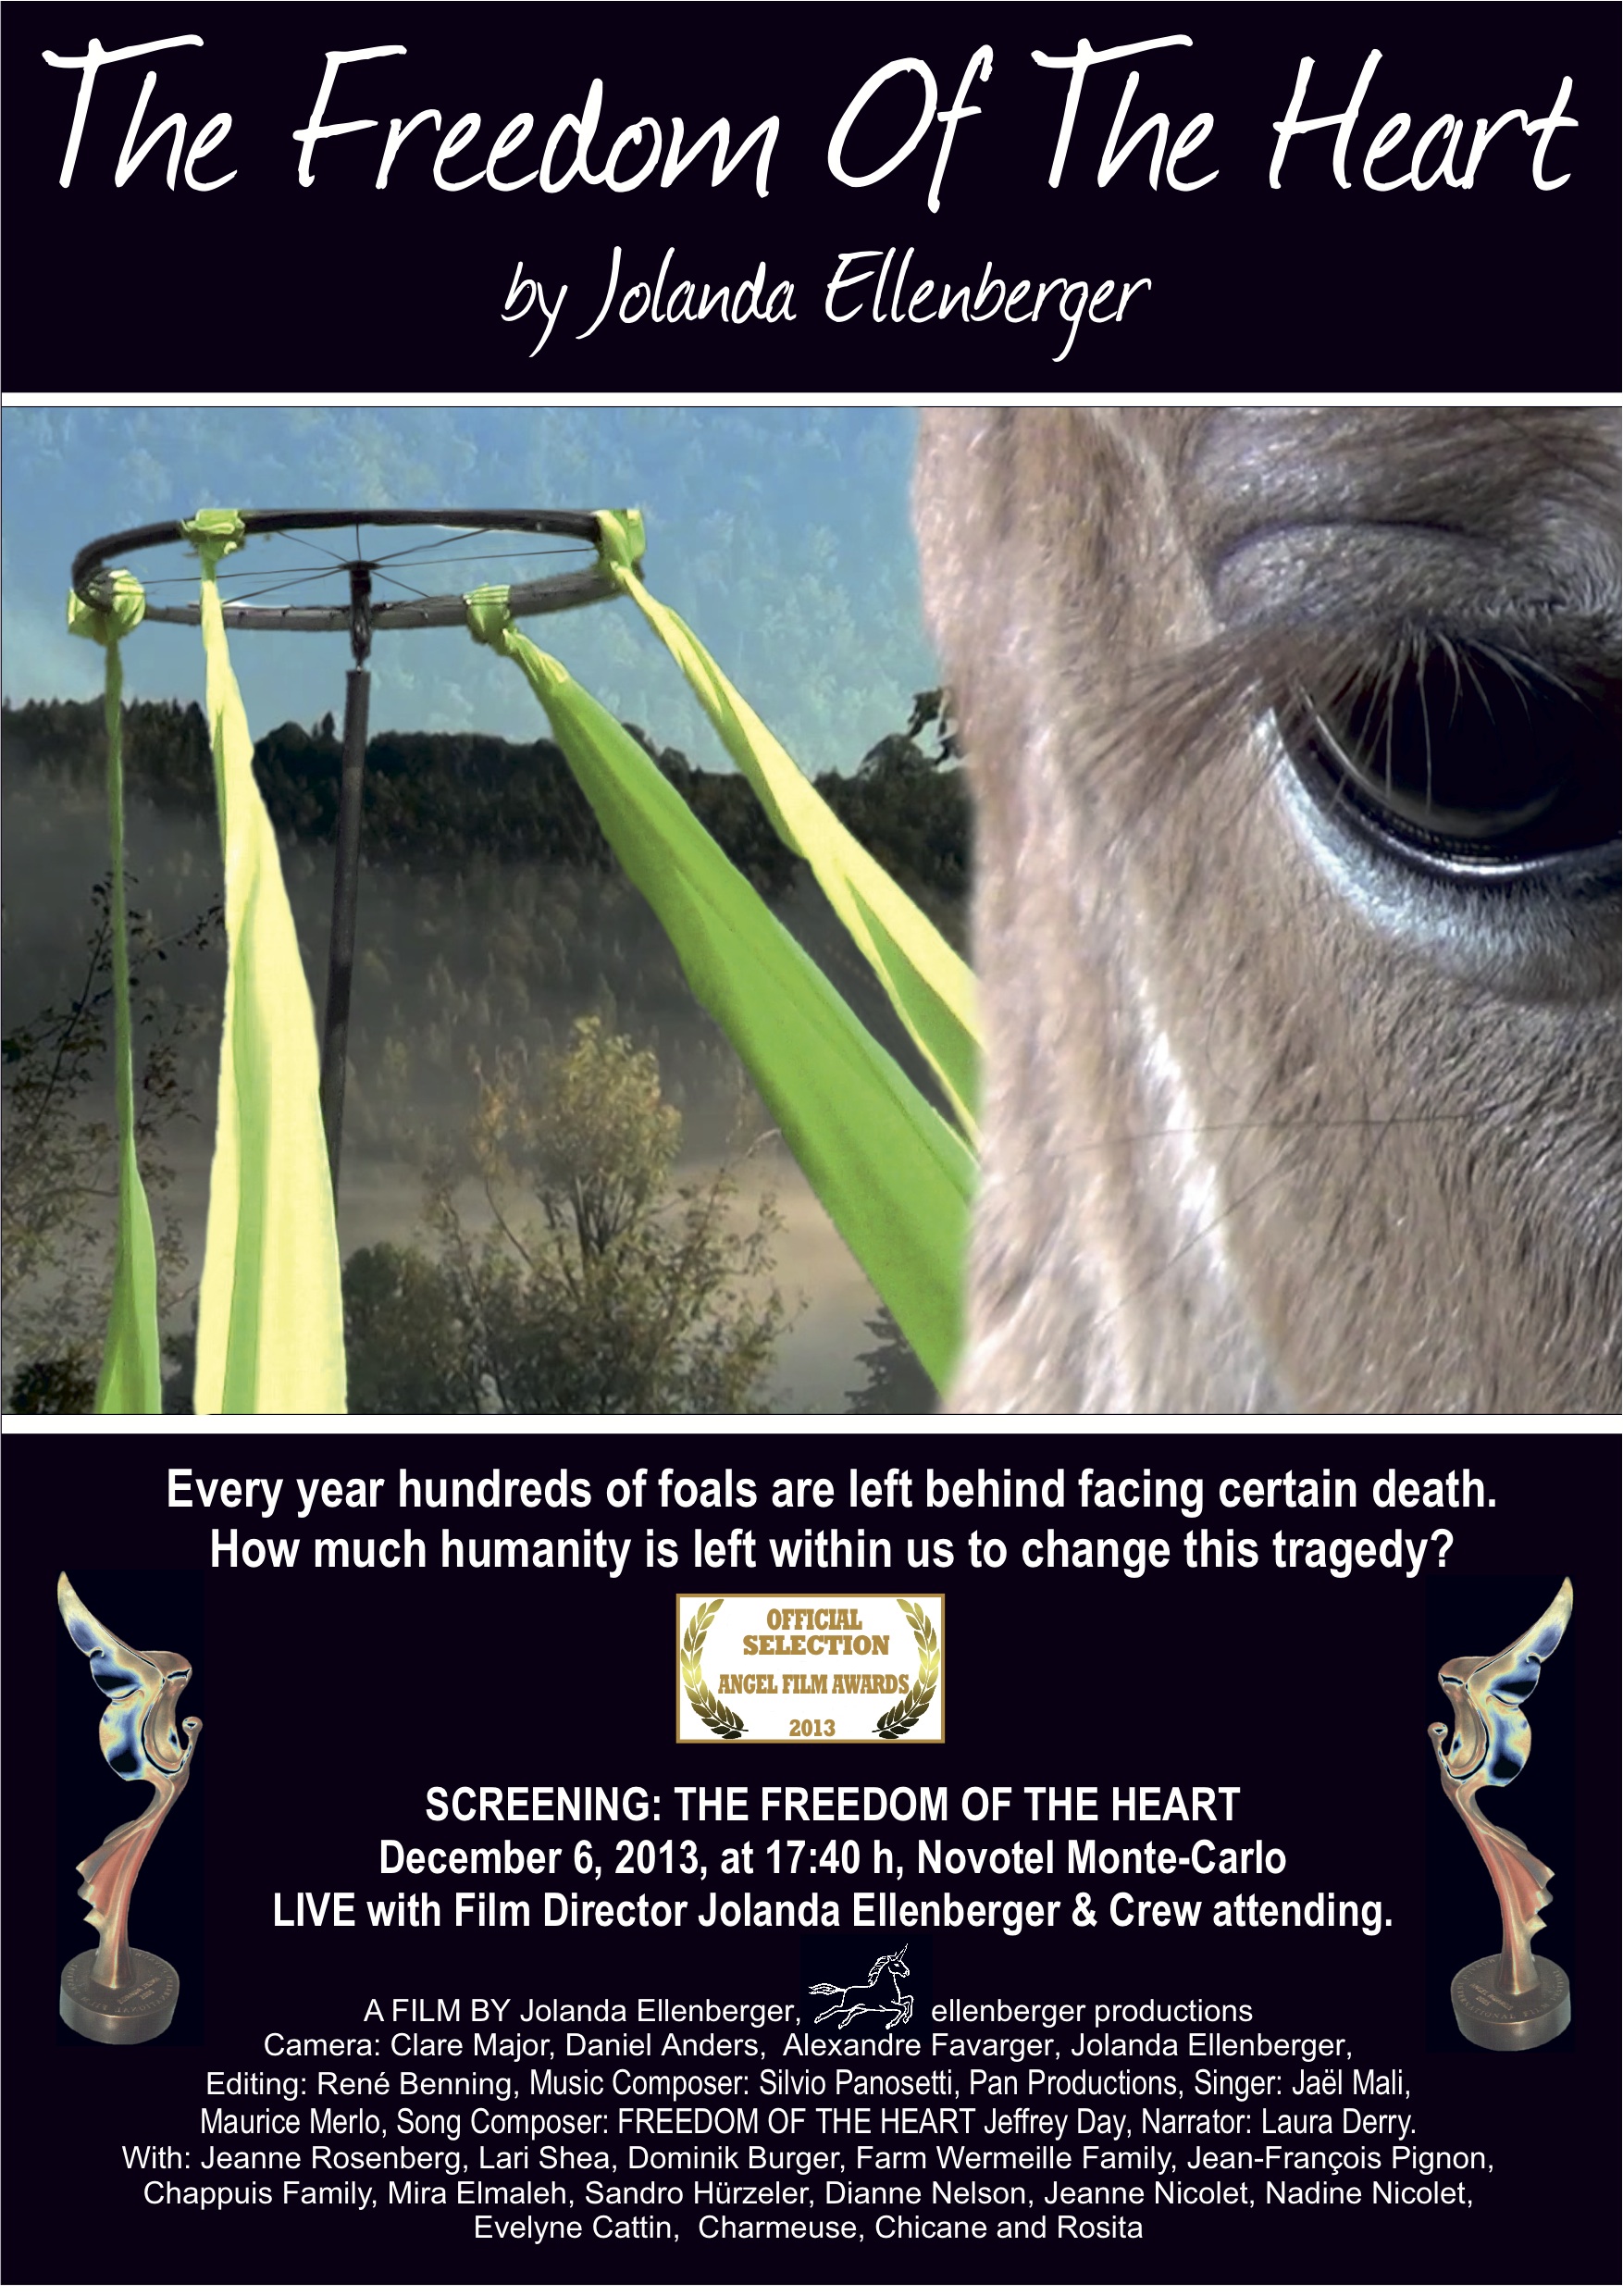 Jolanda Ellenberger's new short documentary THE FREEDOM OF THE HEART - THE FOAL STORY won the BEST HUMANITARIAN SHORT FILM ANGELS AWARD in Monaco on December 6, 2013 and the INDIE FEST AWARD OF MERIT on March 7, 2014.